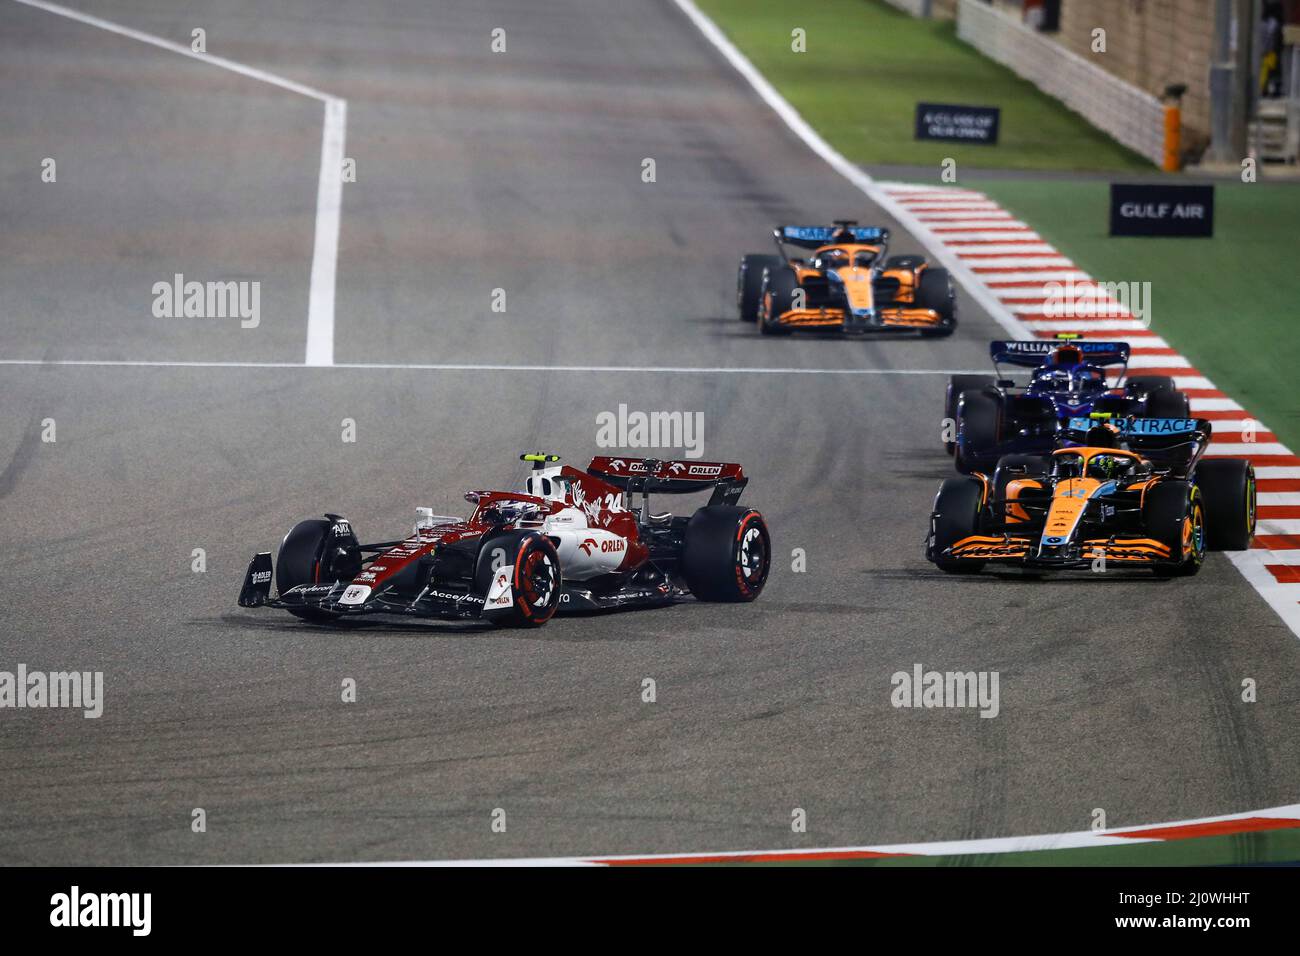 (220321) -- SAKHIR, March 21, 2022 (Xinhua) -- Alfa Romeo's Chinese driver Zhou Guanyu (L) competes during the Bahrain Formula One Grand Prix at the Bahrain International Circuit in the city of Sakhir on March 20, 2022. (DPPI/Handout via Xinhua) Stock Photo